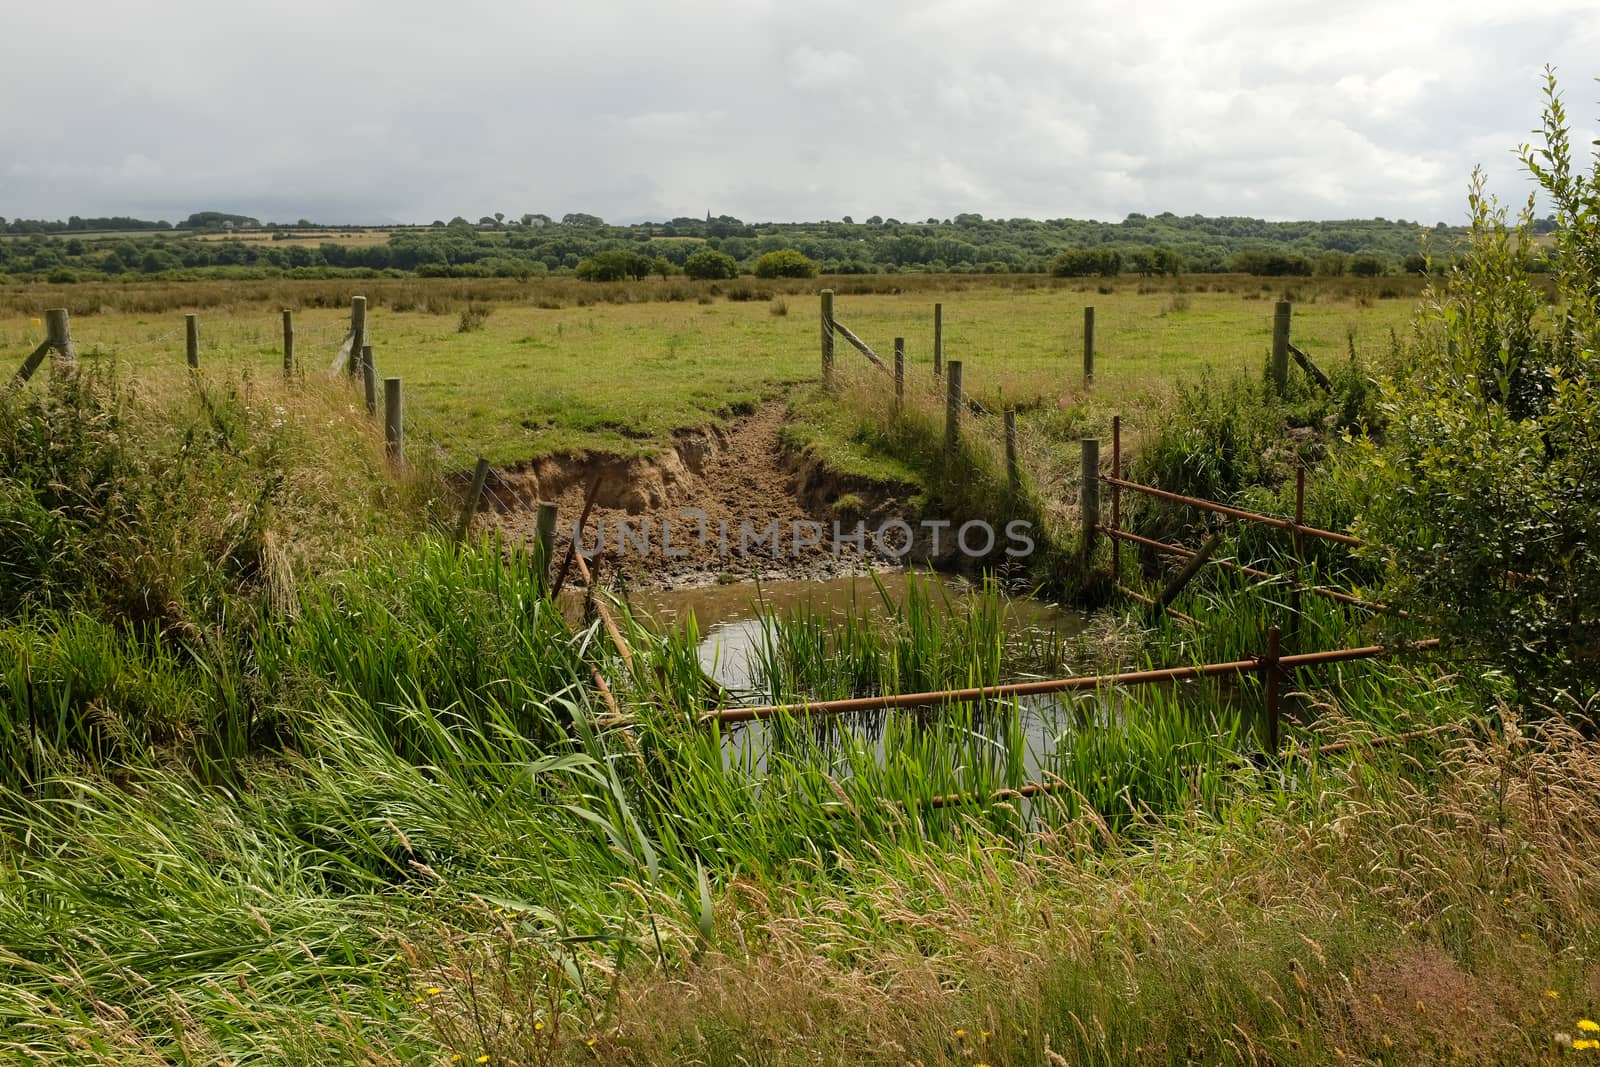 An area of river fenced off as a watering hole next to a field of green grass.